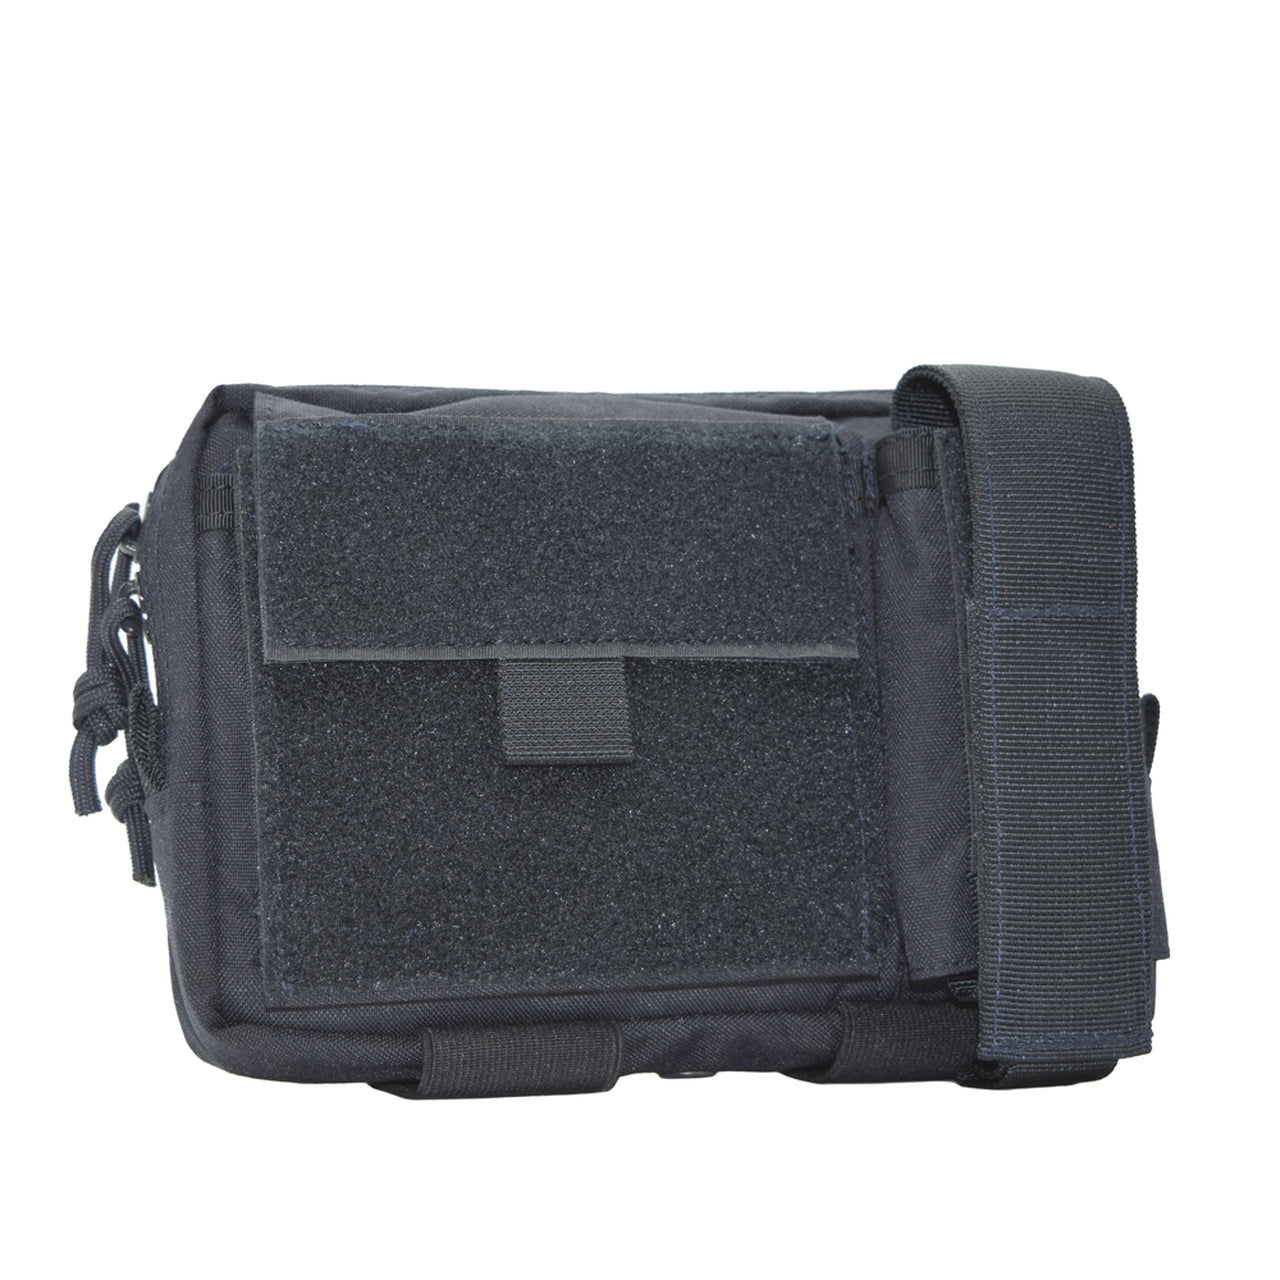 A Shellback Tactical Super Admin Pouch with a zippered pocket.